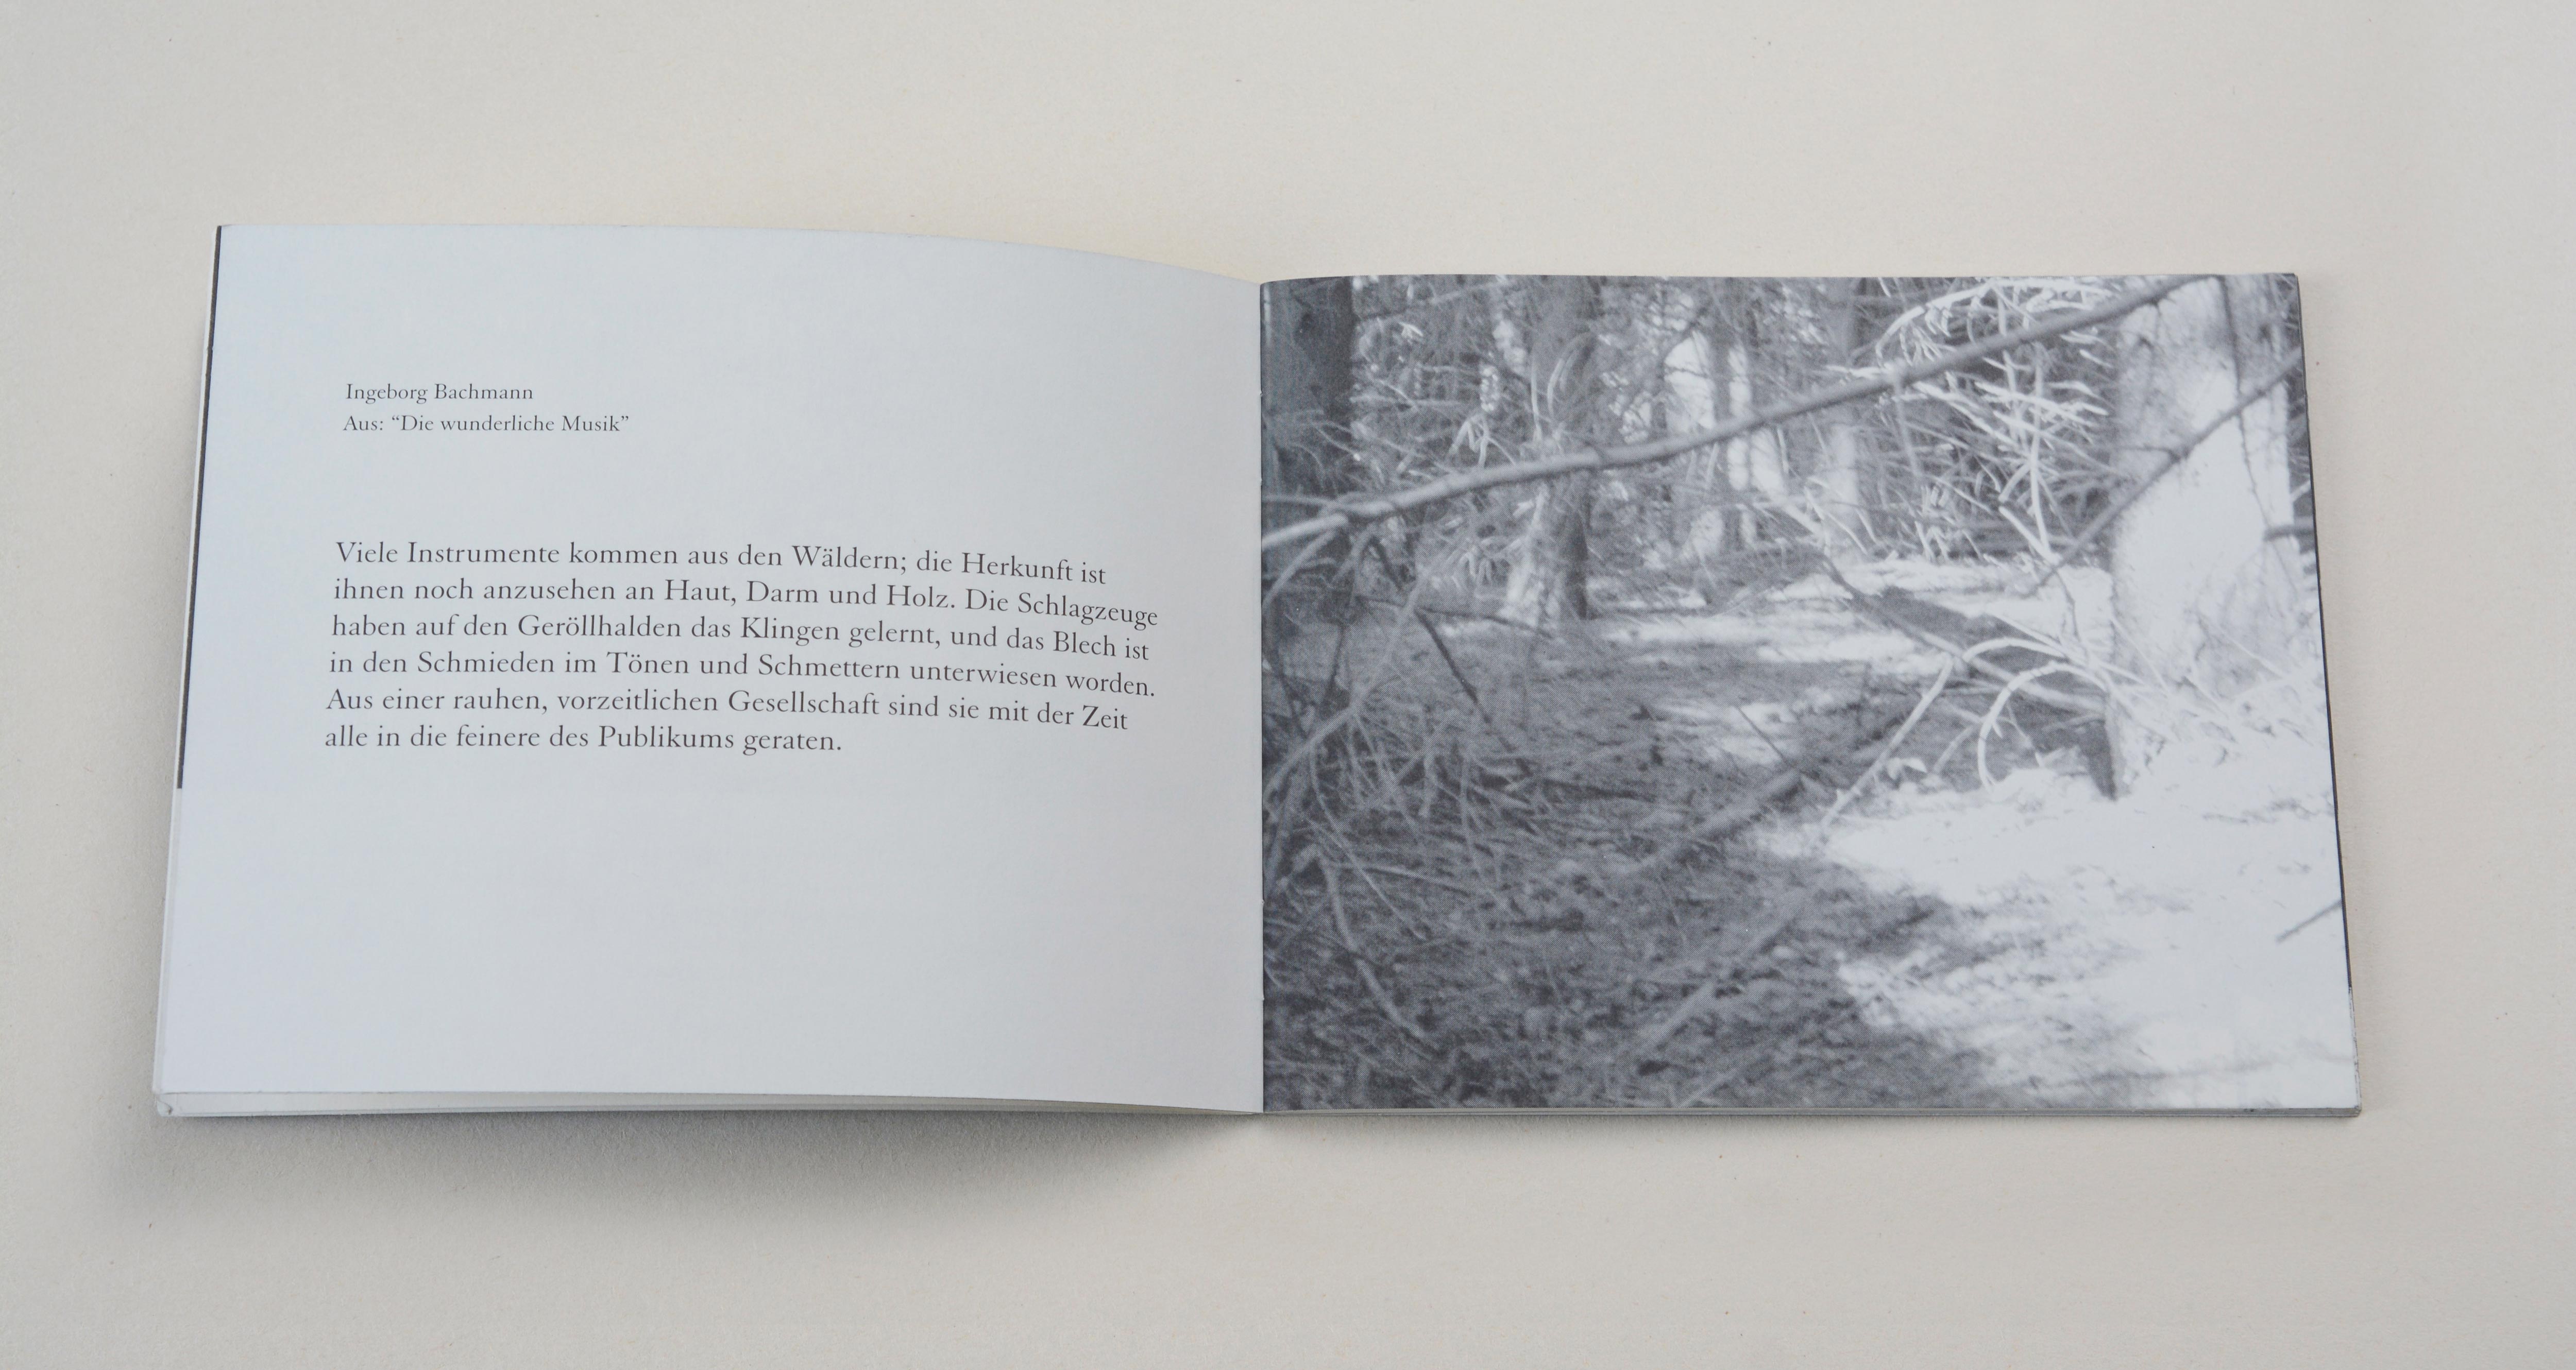 Double page. Left: Block of text. Right: Full-page b/w image. Inside the forest.